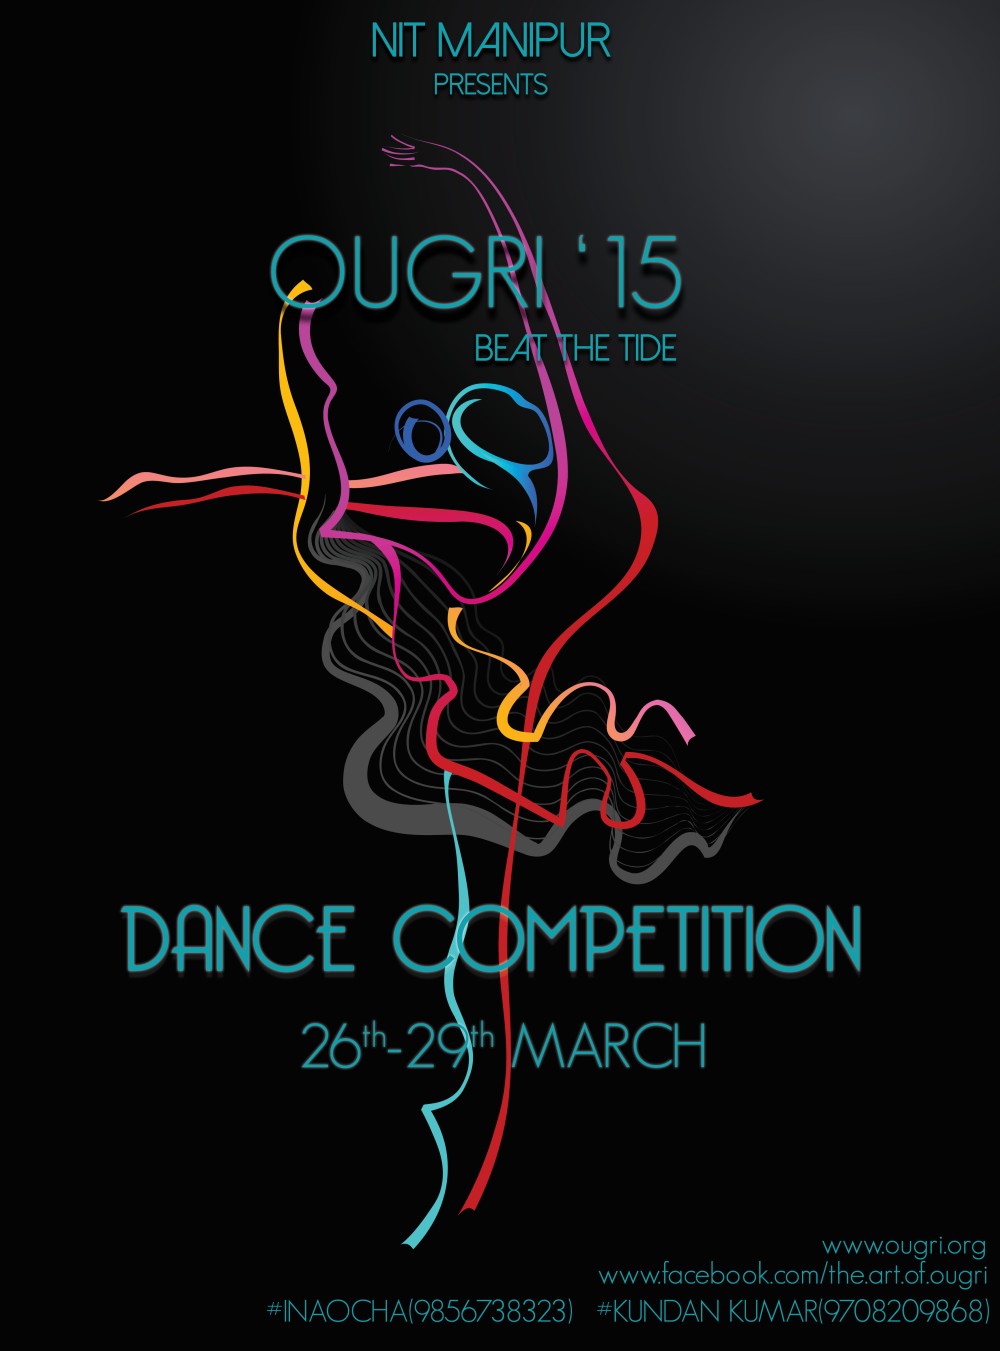   Dance Competition : Ourgri '15 at NIT Manipur  